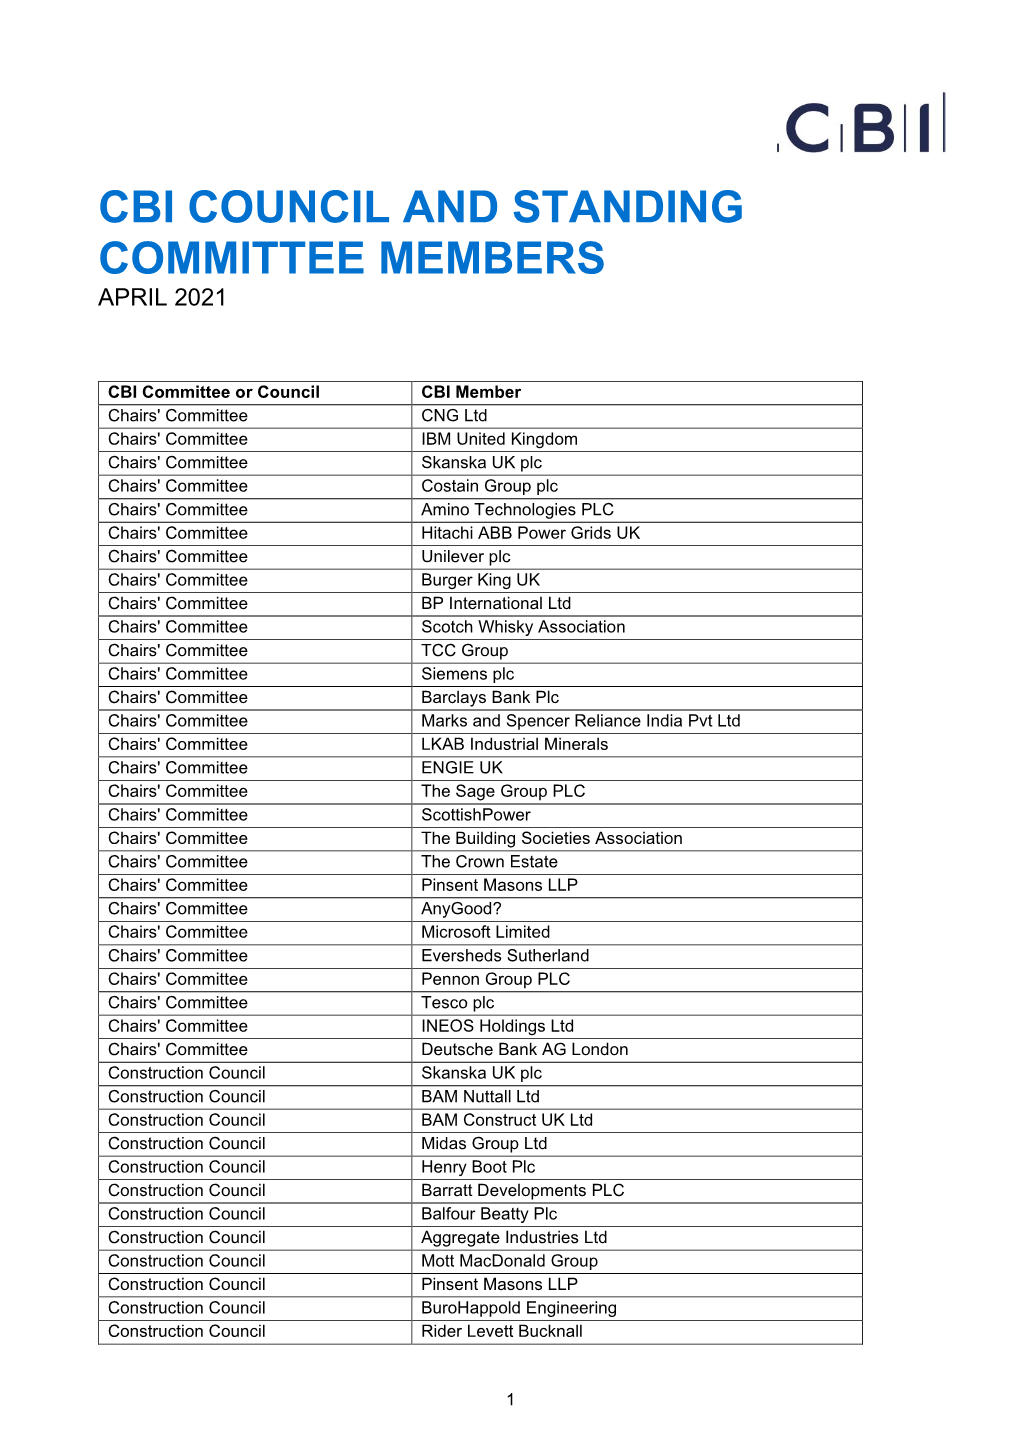 Cbi Council and Standing Committee Members April 2021